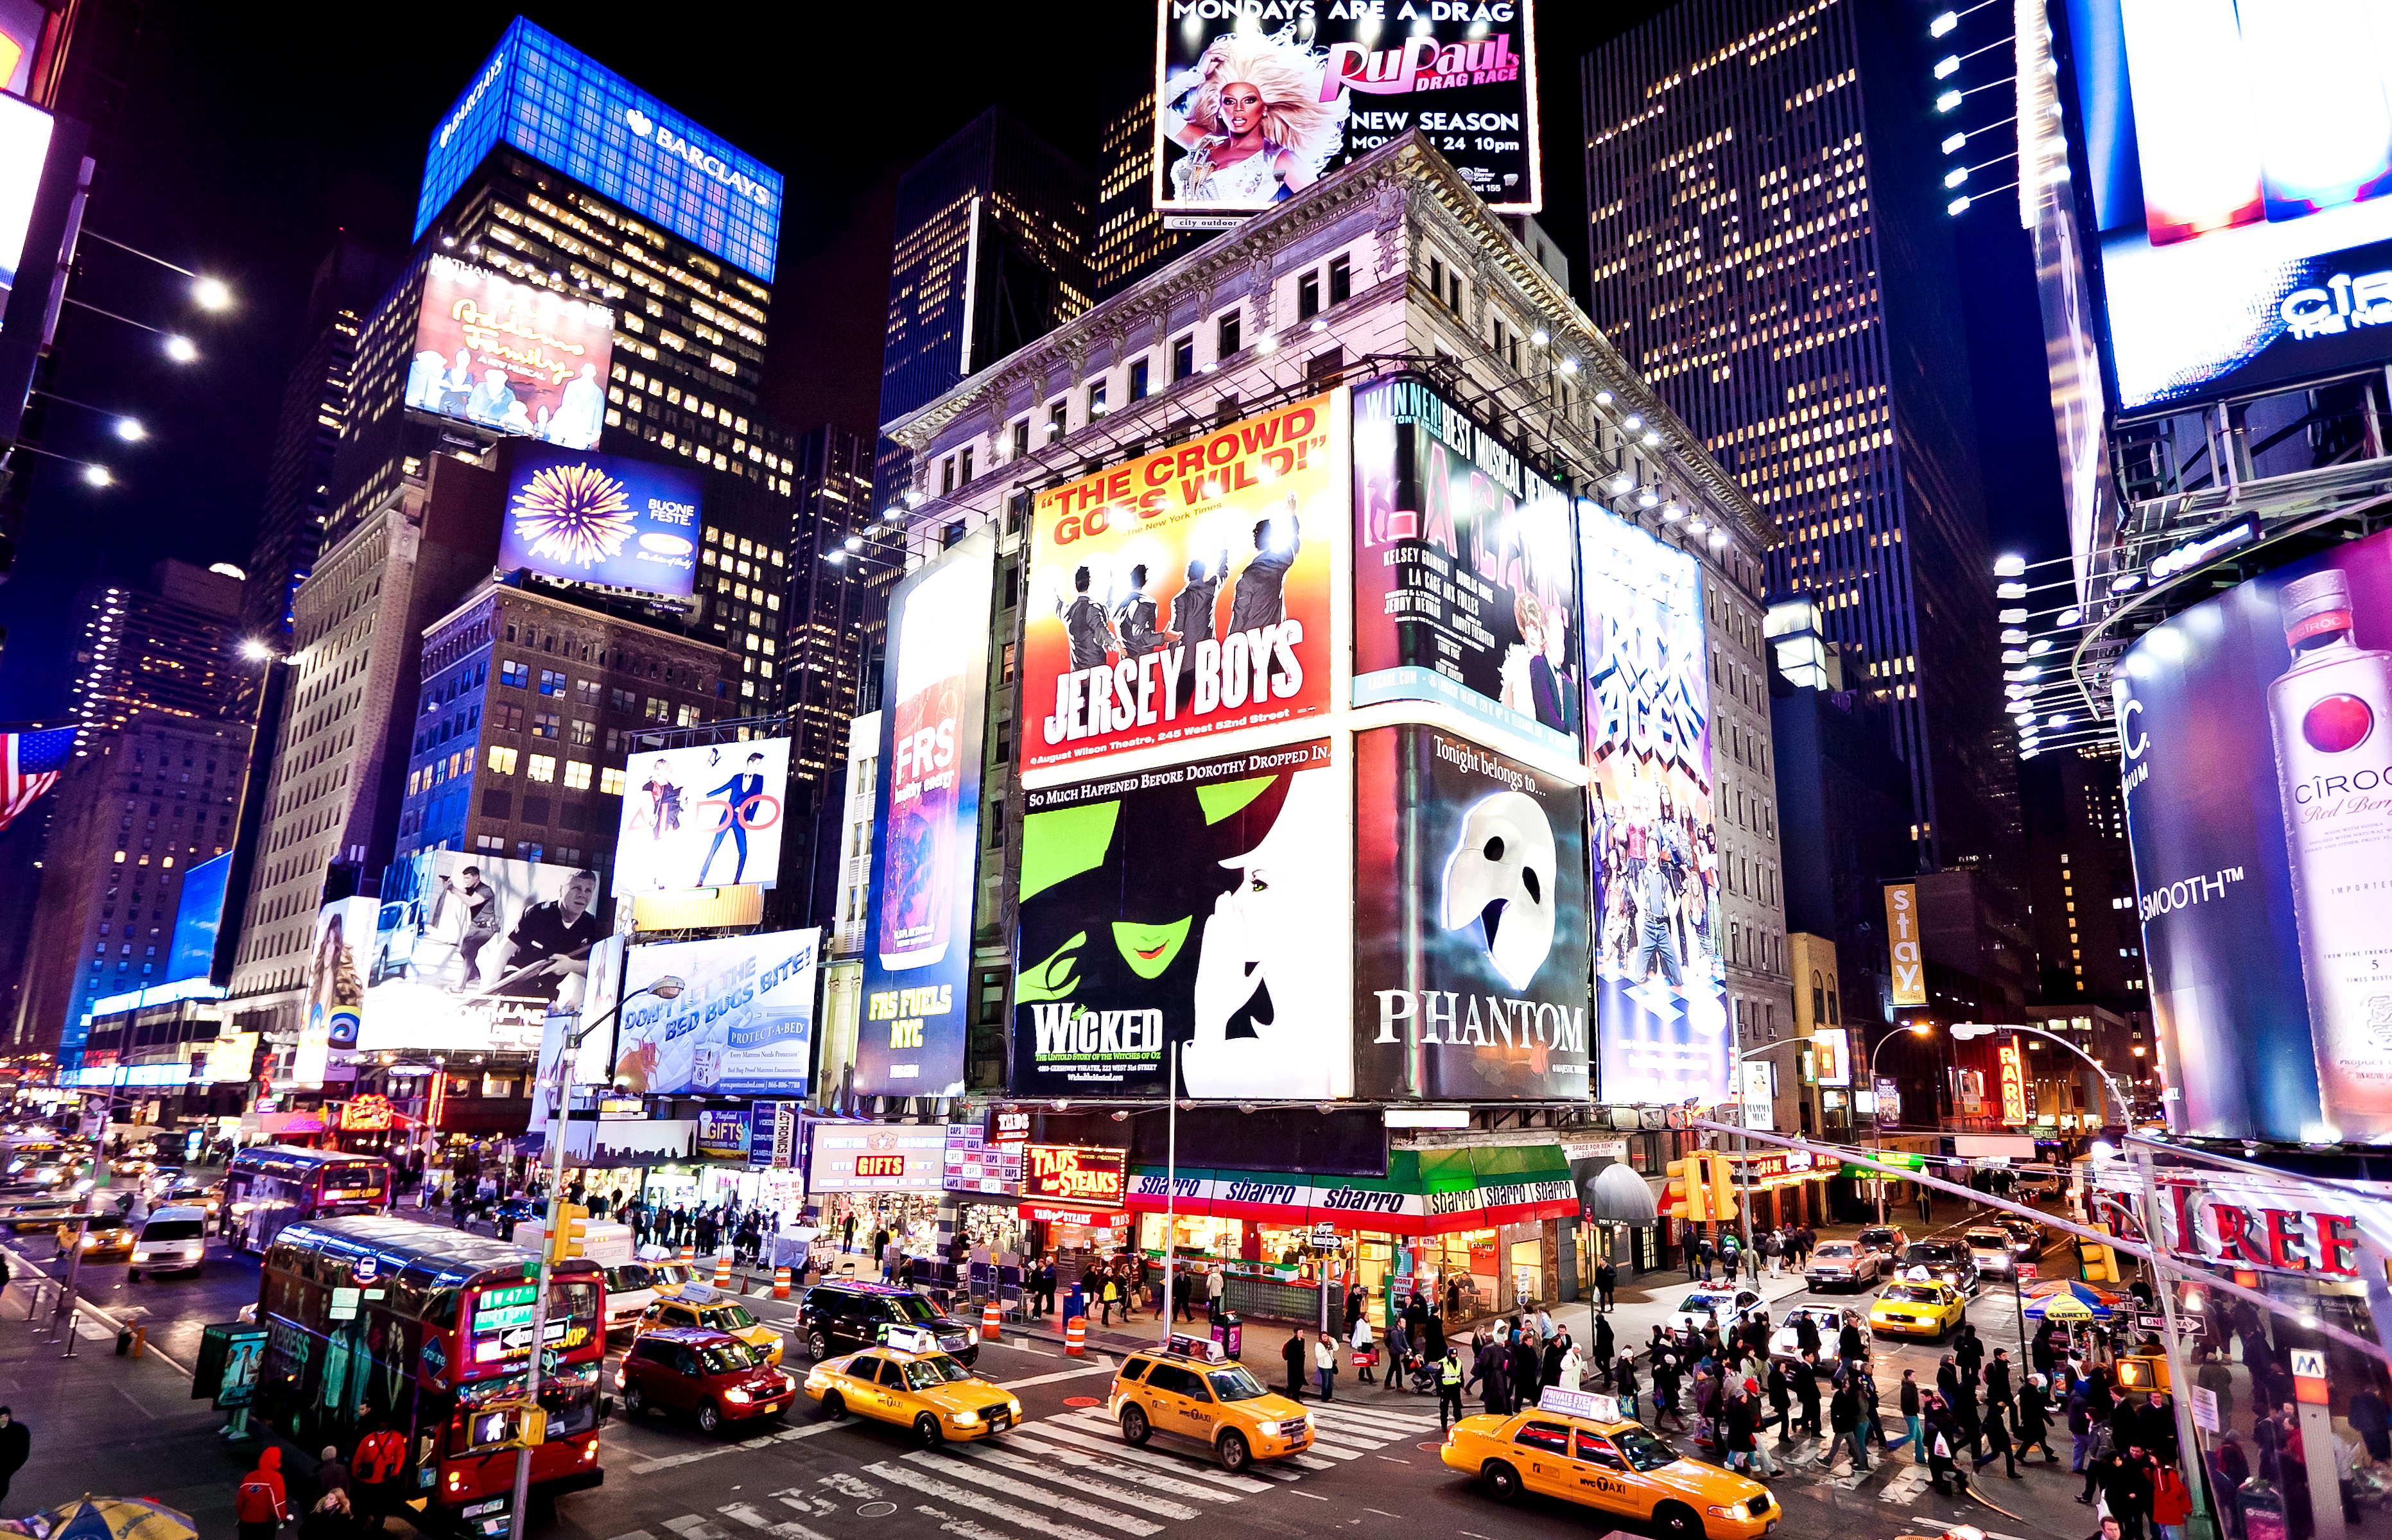 Come See These New Shows on Broadway New York Sightseeing